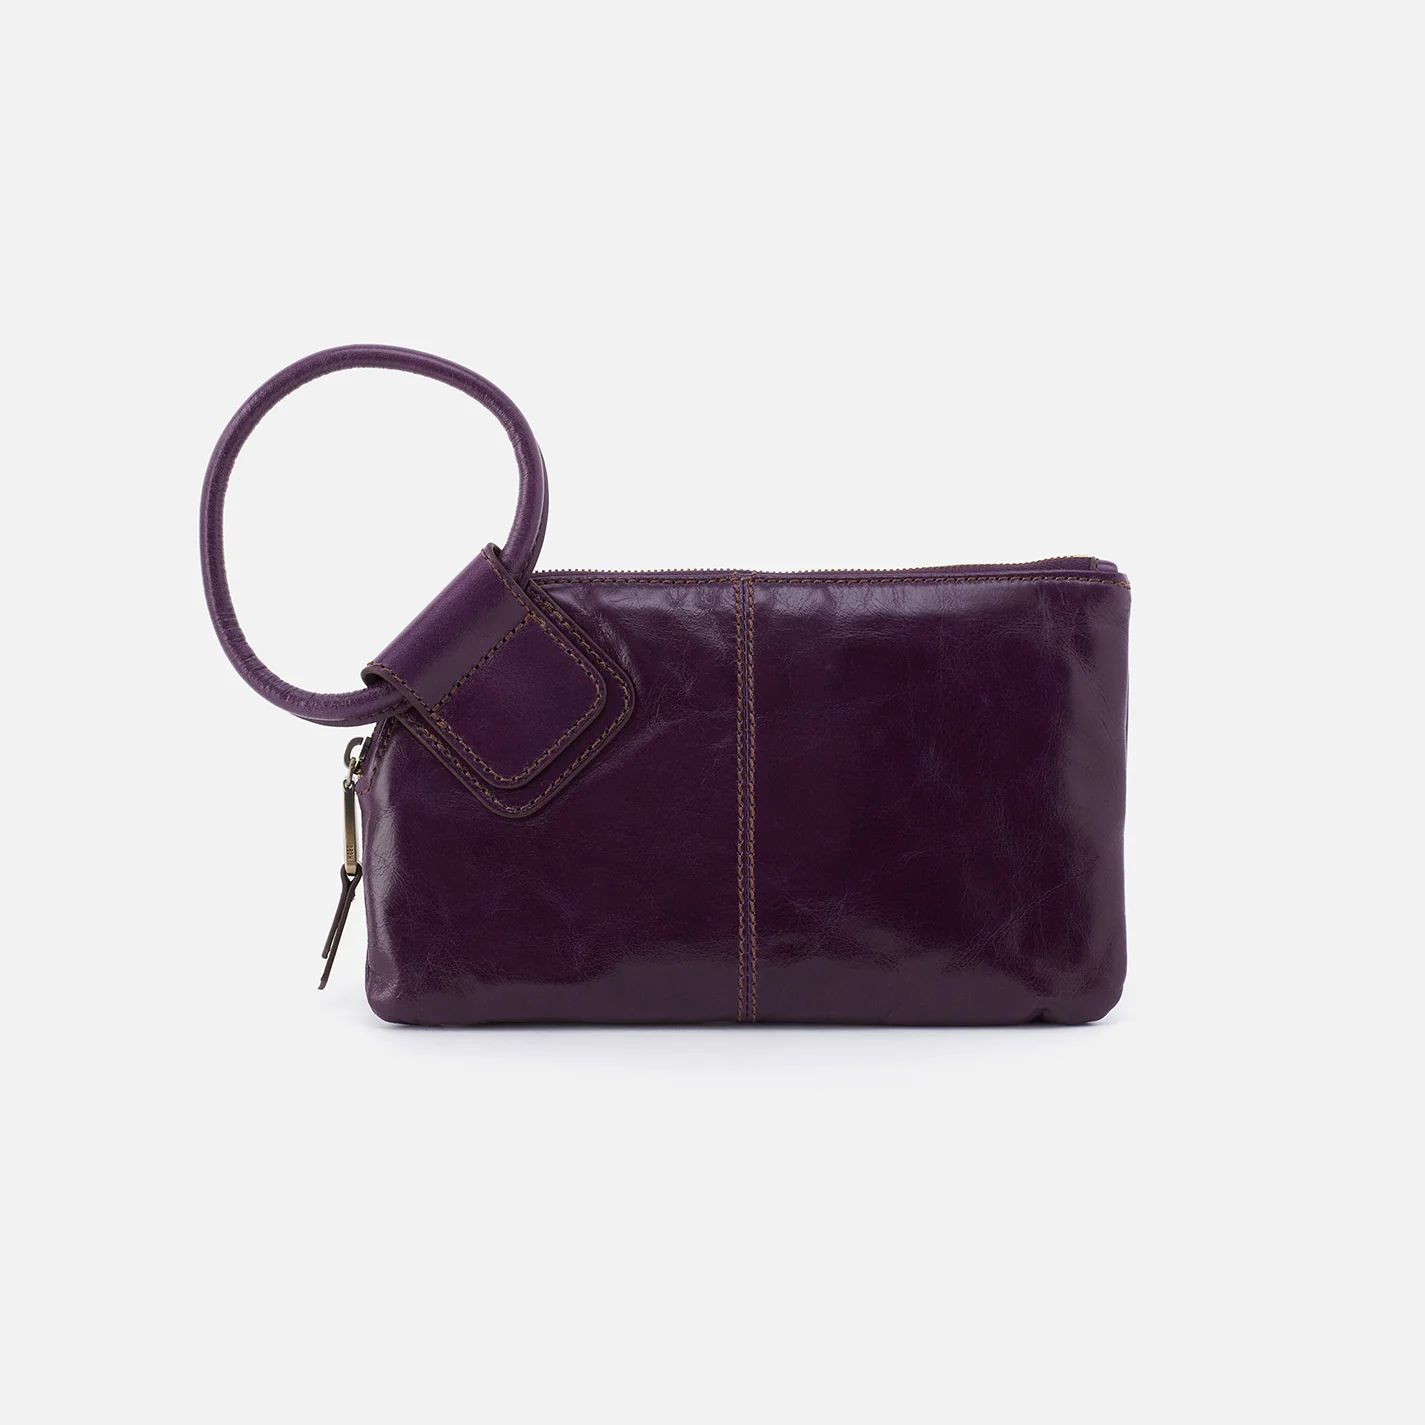 Sable Wristlet in Polished Leather - Deep Purple | HOBO Bags